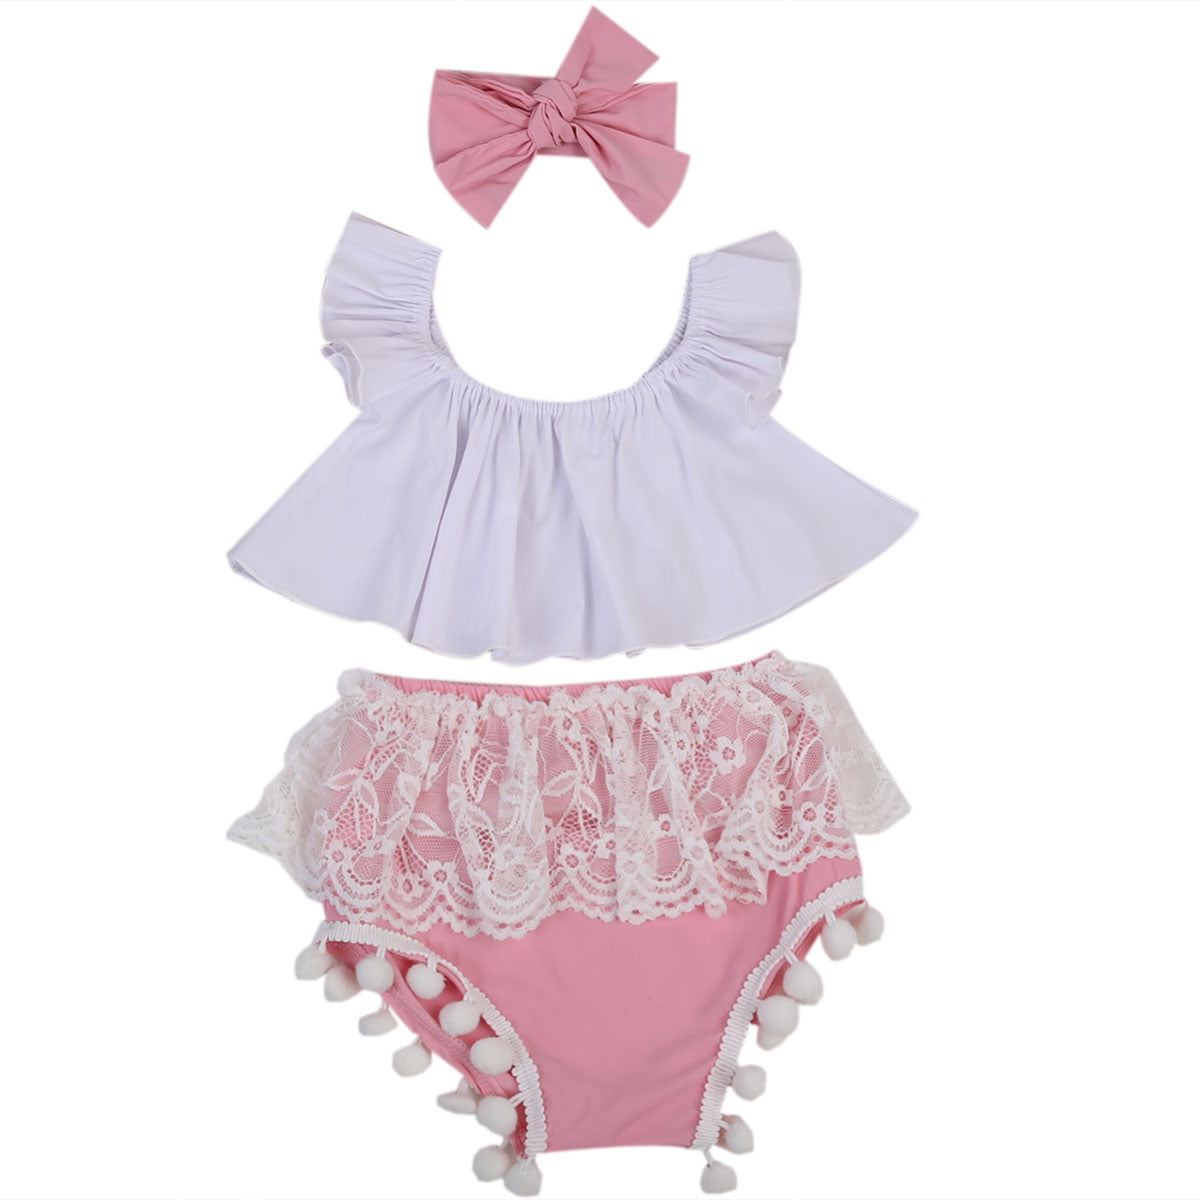 Baby headband and panties in pink with bow in white